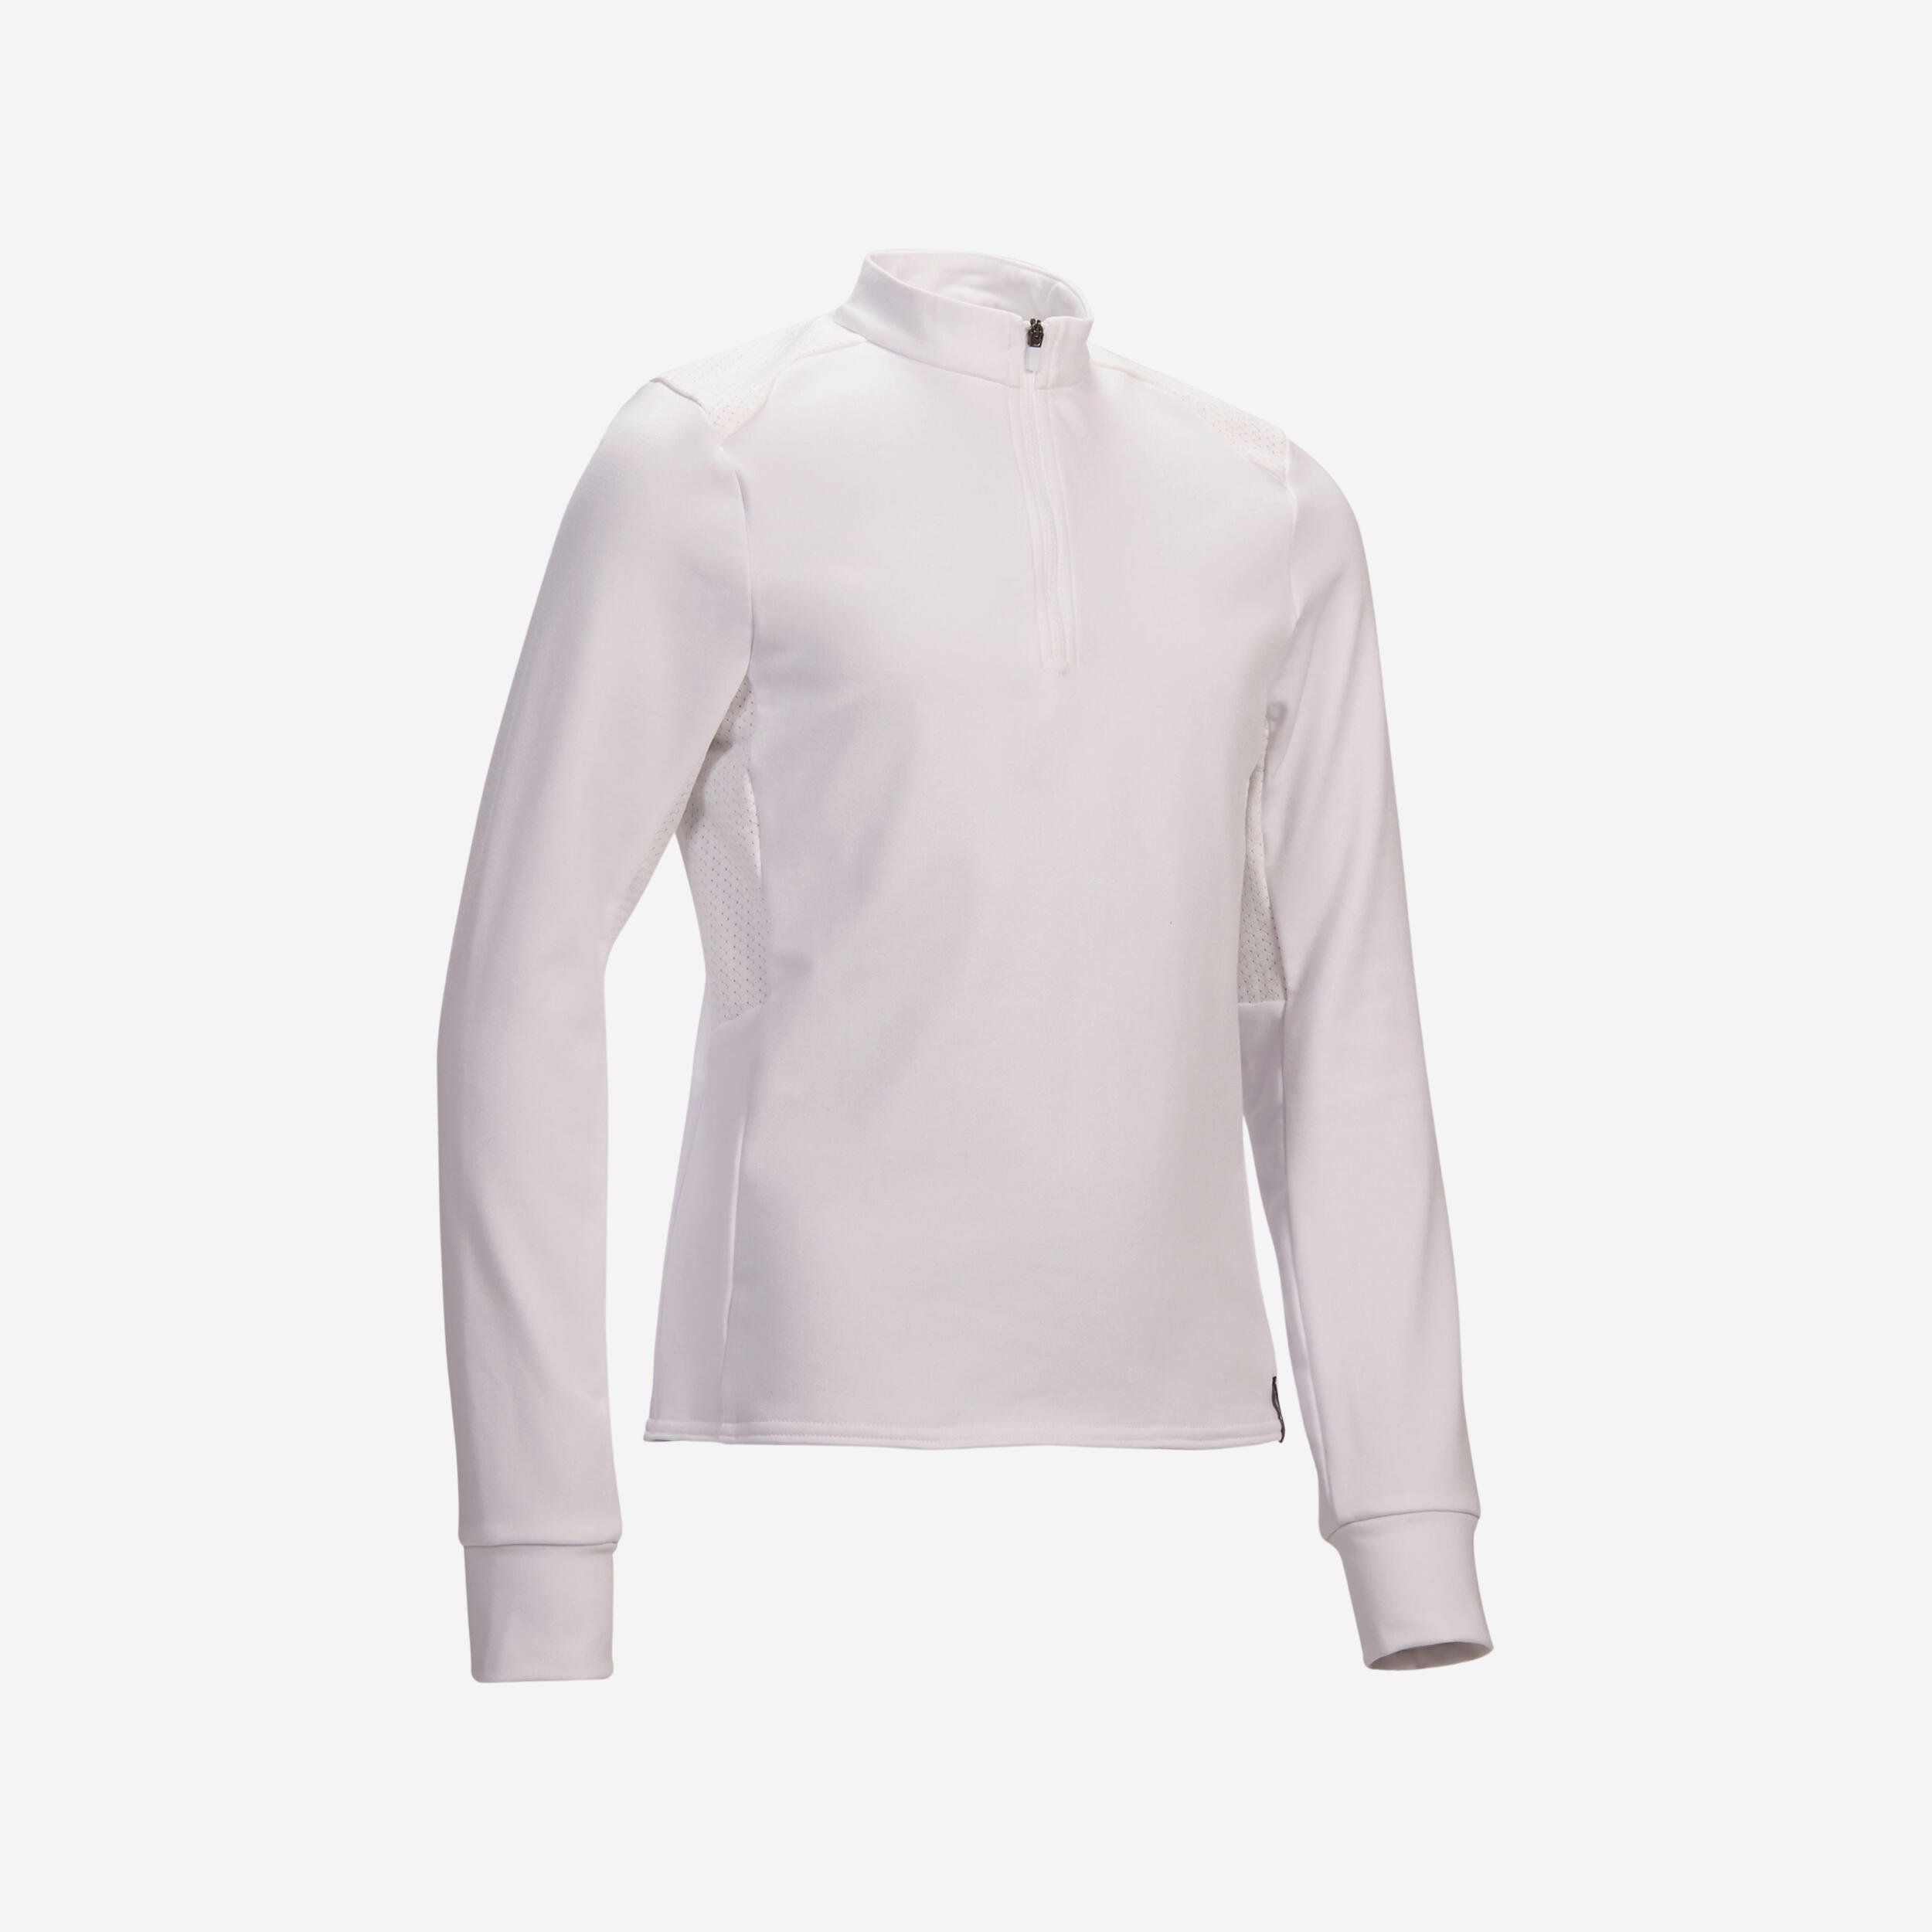 Kids' Horse Riding Long-Sleeved Warm Competition Polo 500 - White 1/9